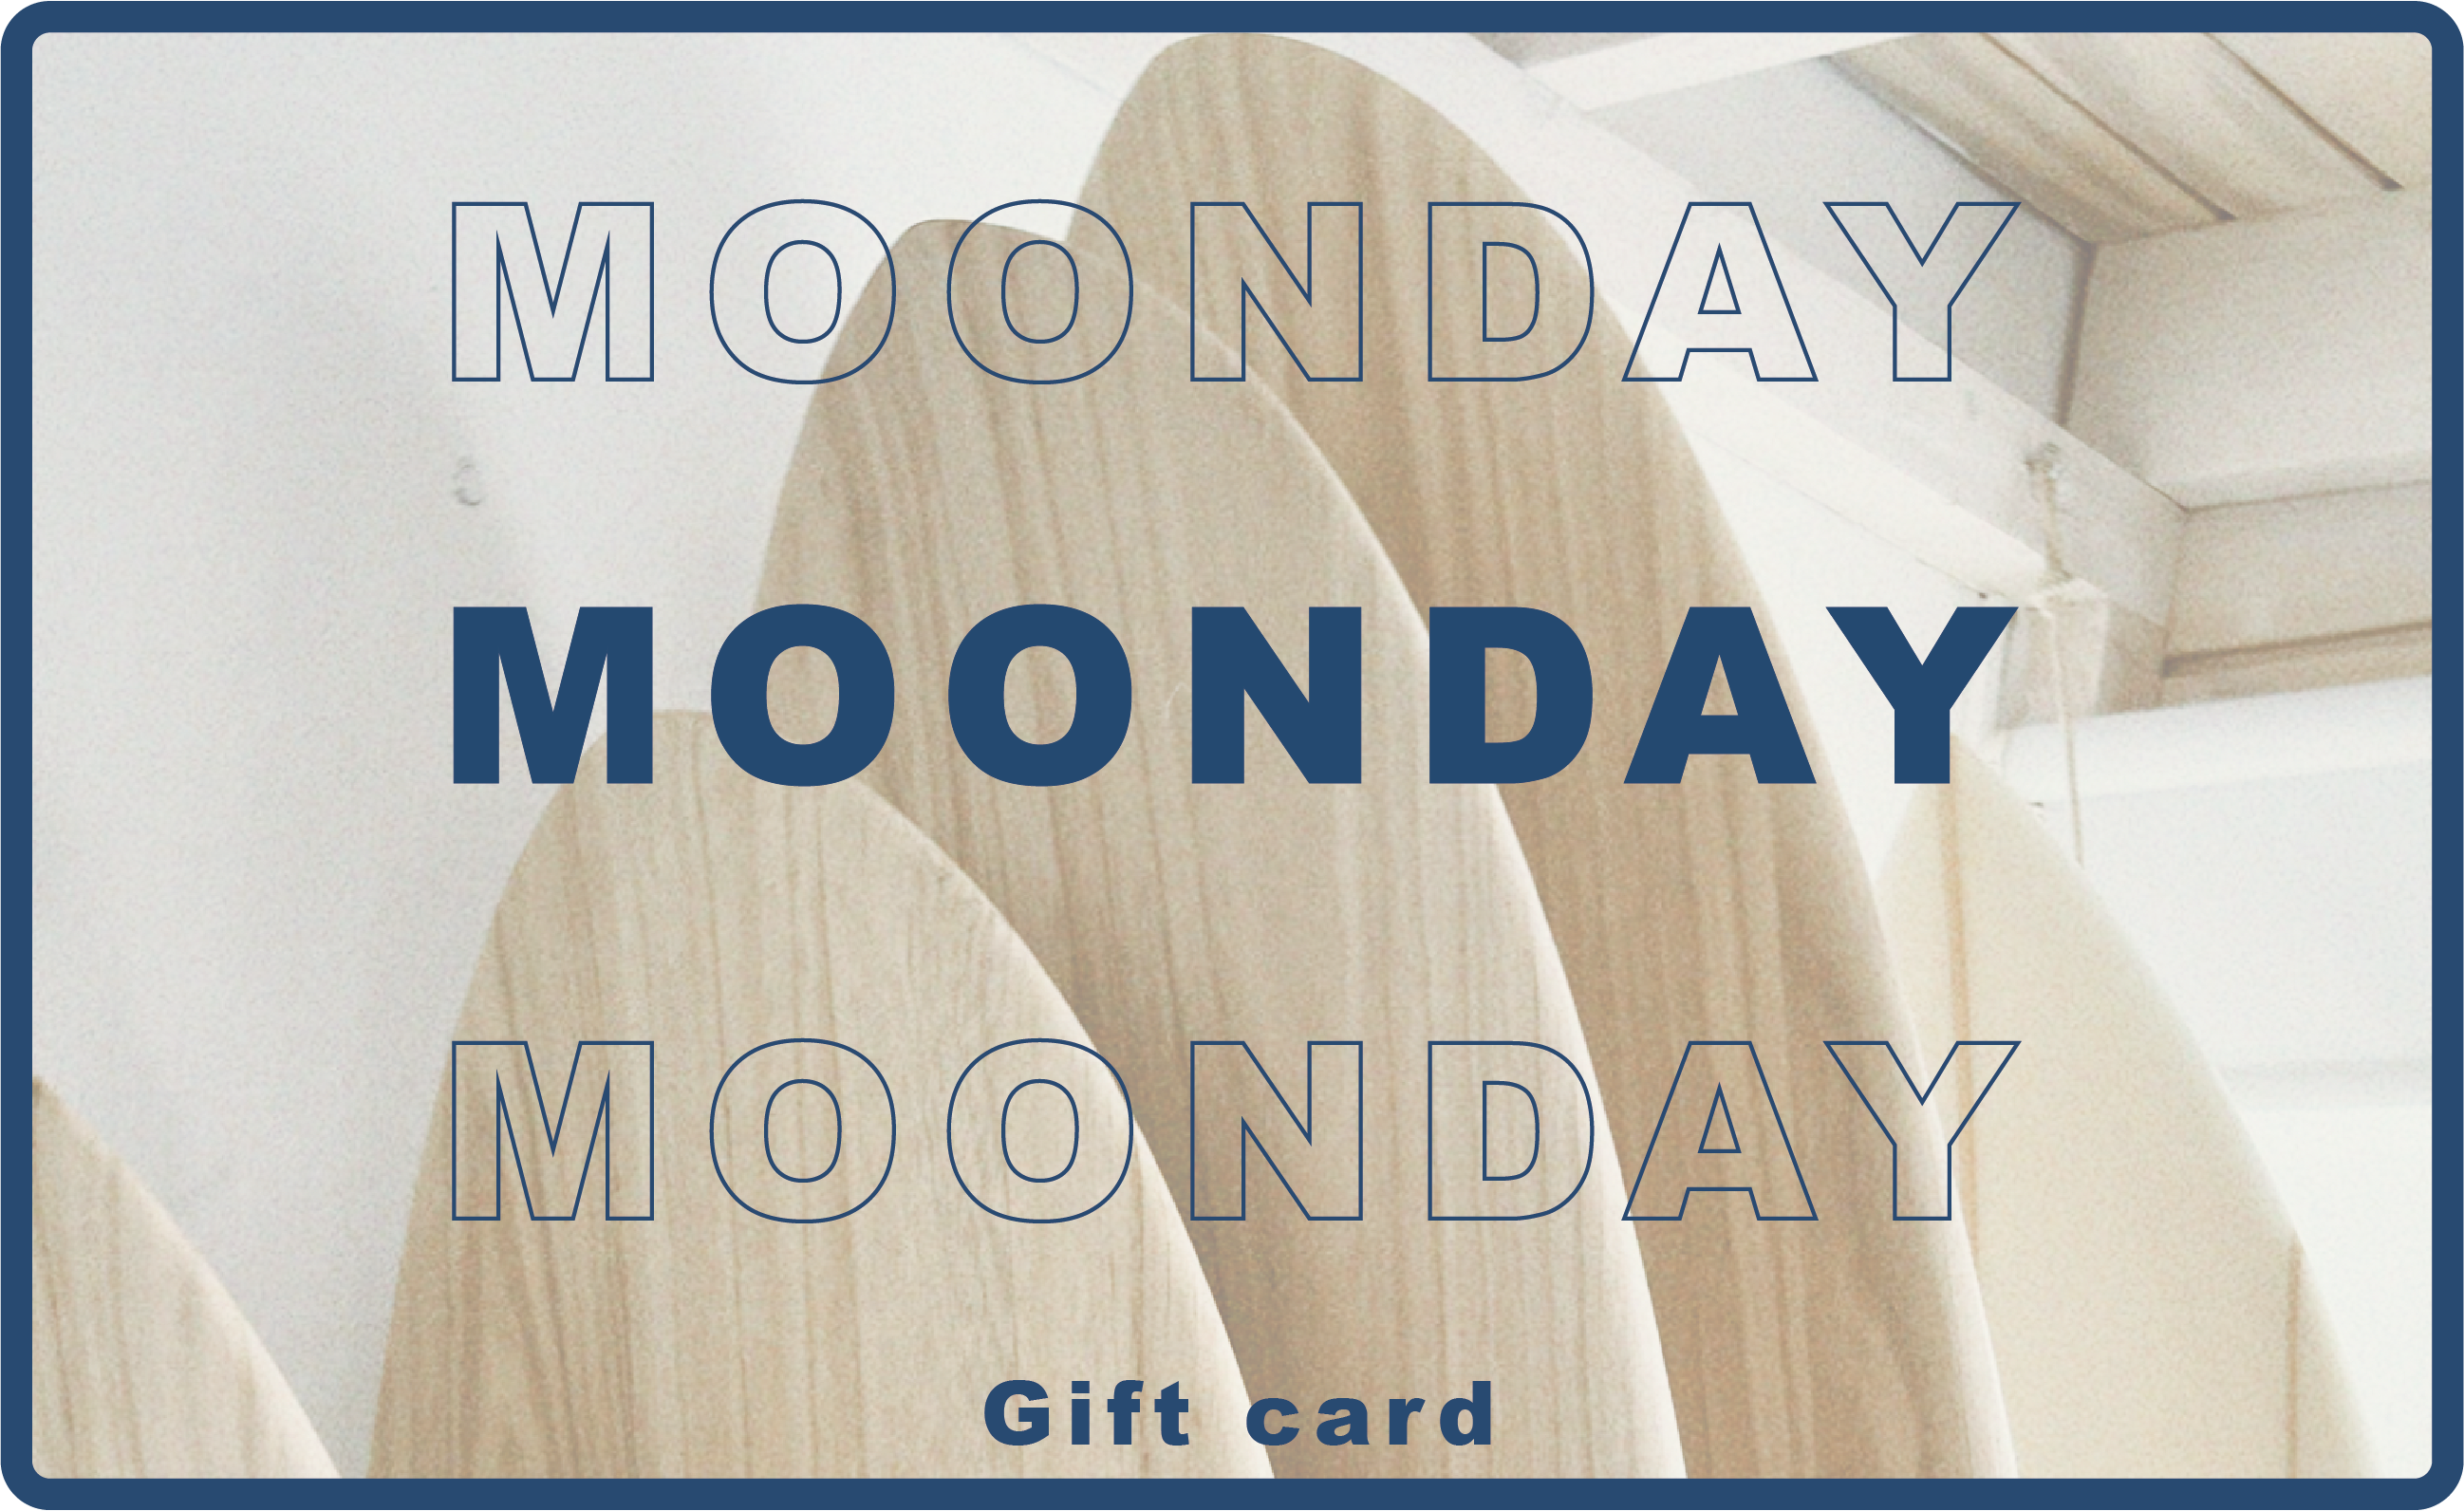 Moonday Gift Card